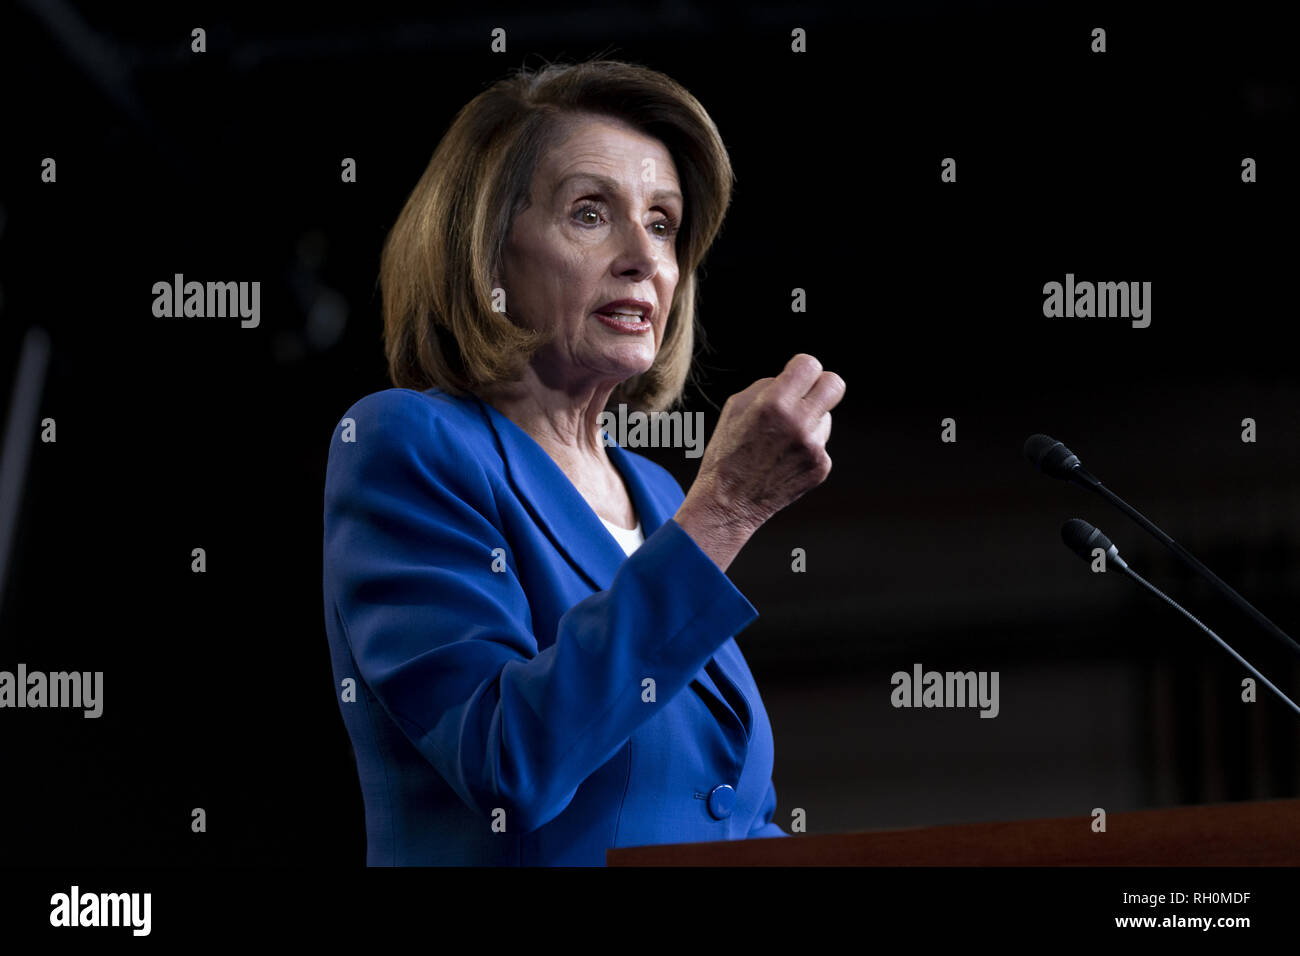 Washington, District of Columbia, USA. 31st Jan, 2019. House Speaker NANCY PELOSI (D-CA) holds her weekly press conference a day after negotiations begin between Congress and the President to find a compromise on border security funding to make sure the government doesn't shut down again. January 31, 2019 Credit: Douglas Christian/ZUMA Wire/Alamy Live News Stock Photo